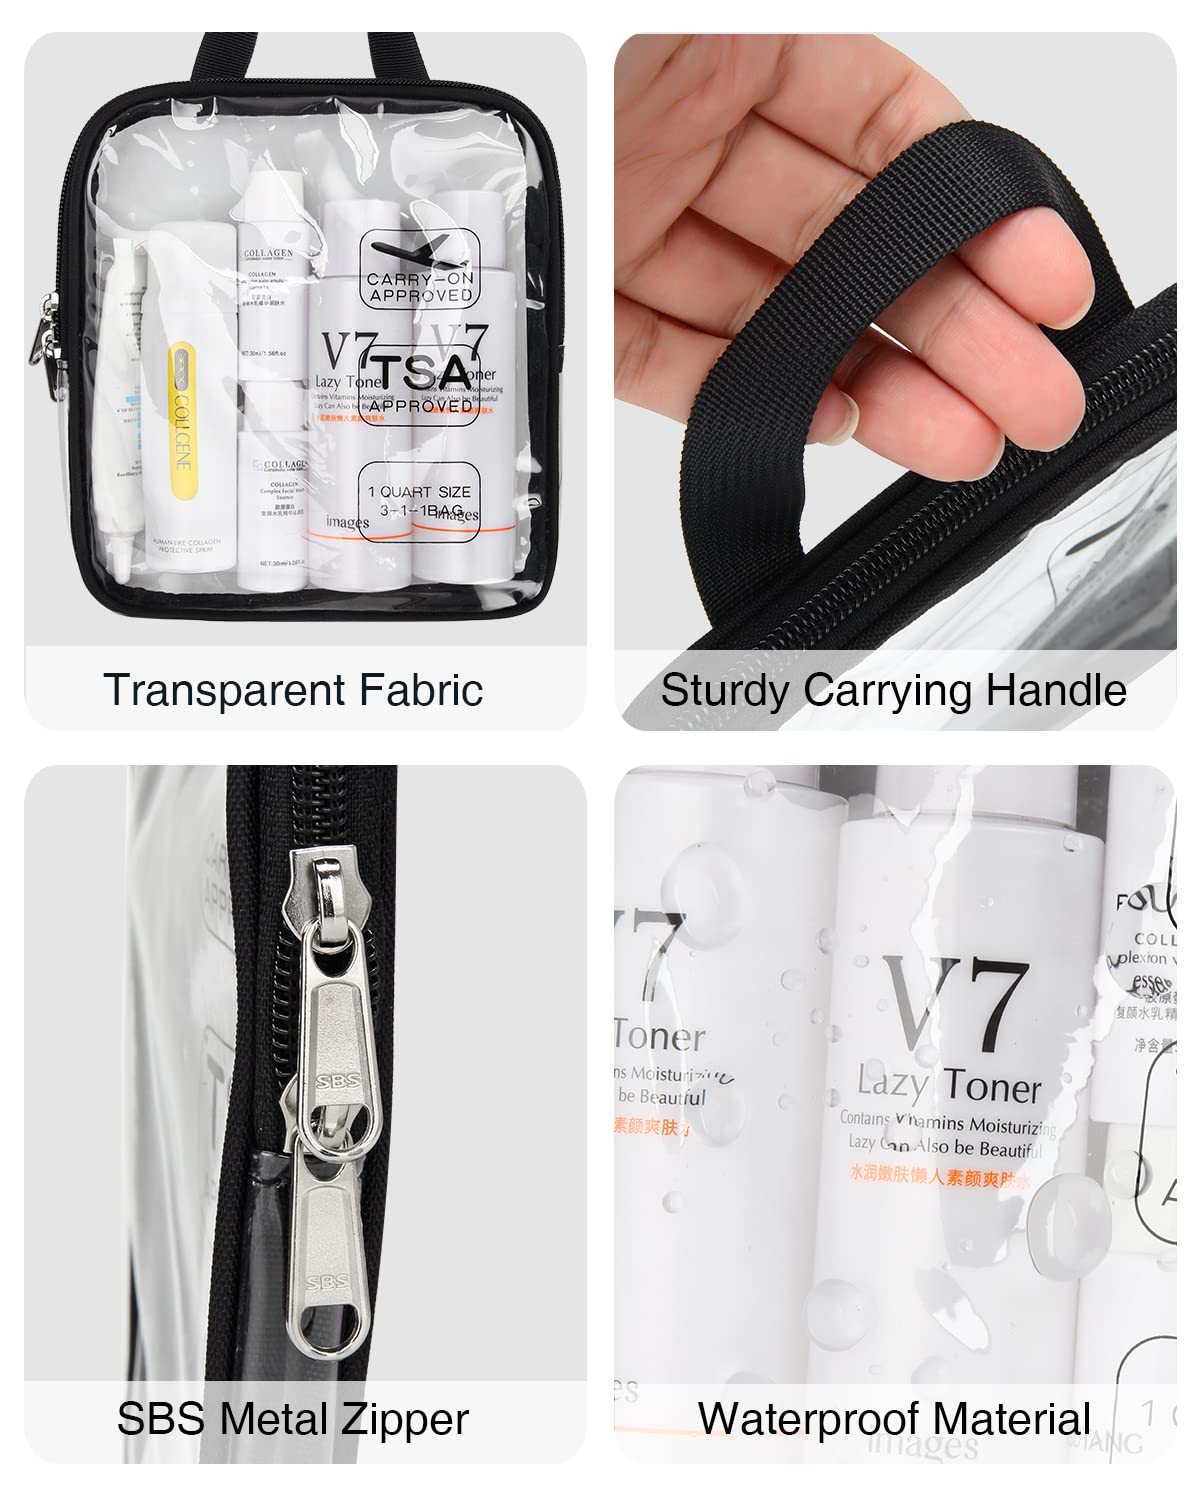 Relavel Tsa Approved Toiletry Bag,Clear Makeup Bag Cosmetic Pouch, Travel Bags for Toiletries wih Zipper,Waterproof Small Toiletries Bag for Women and Girls